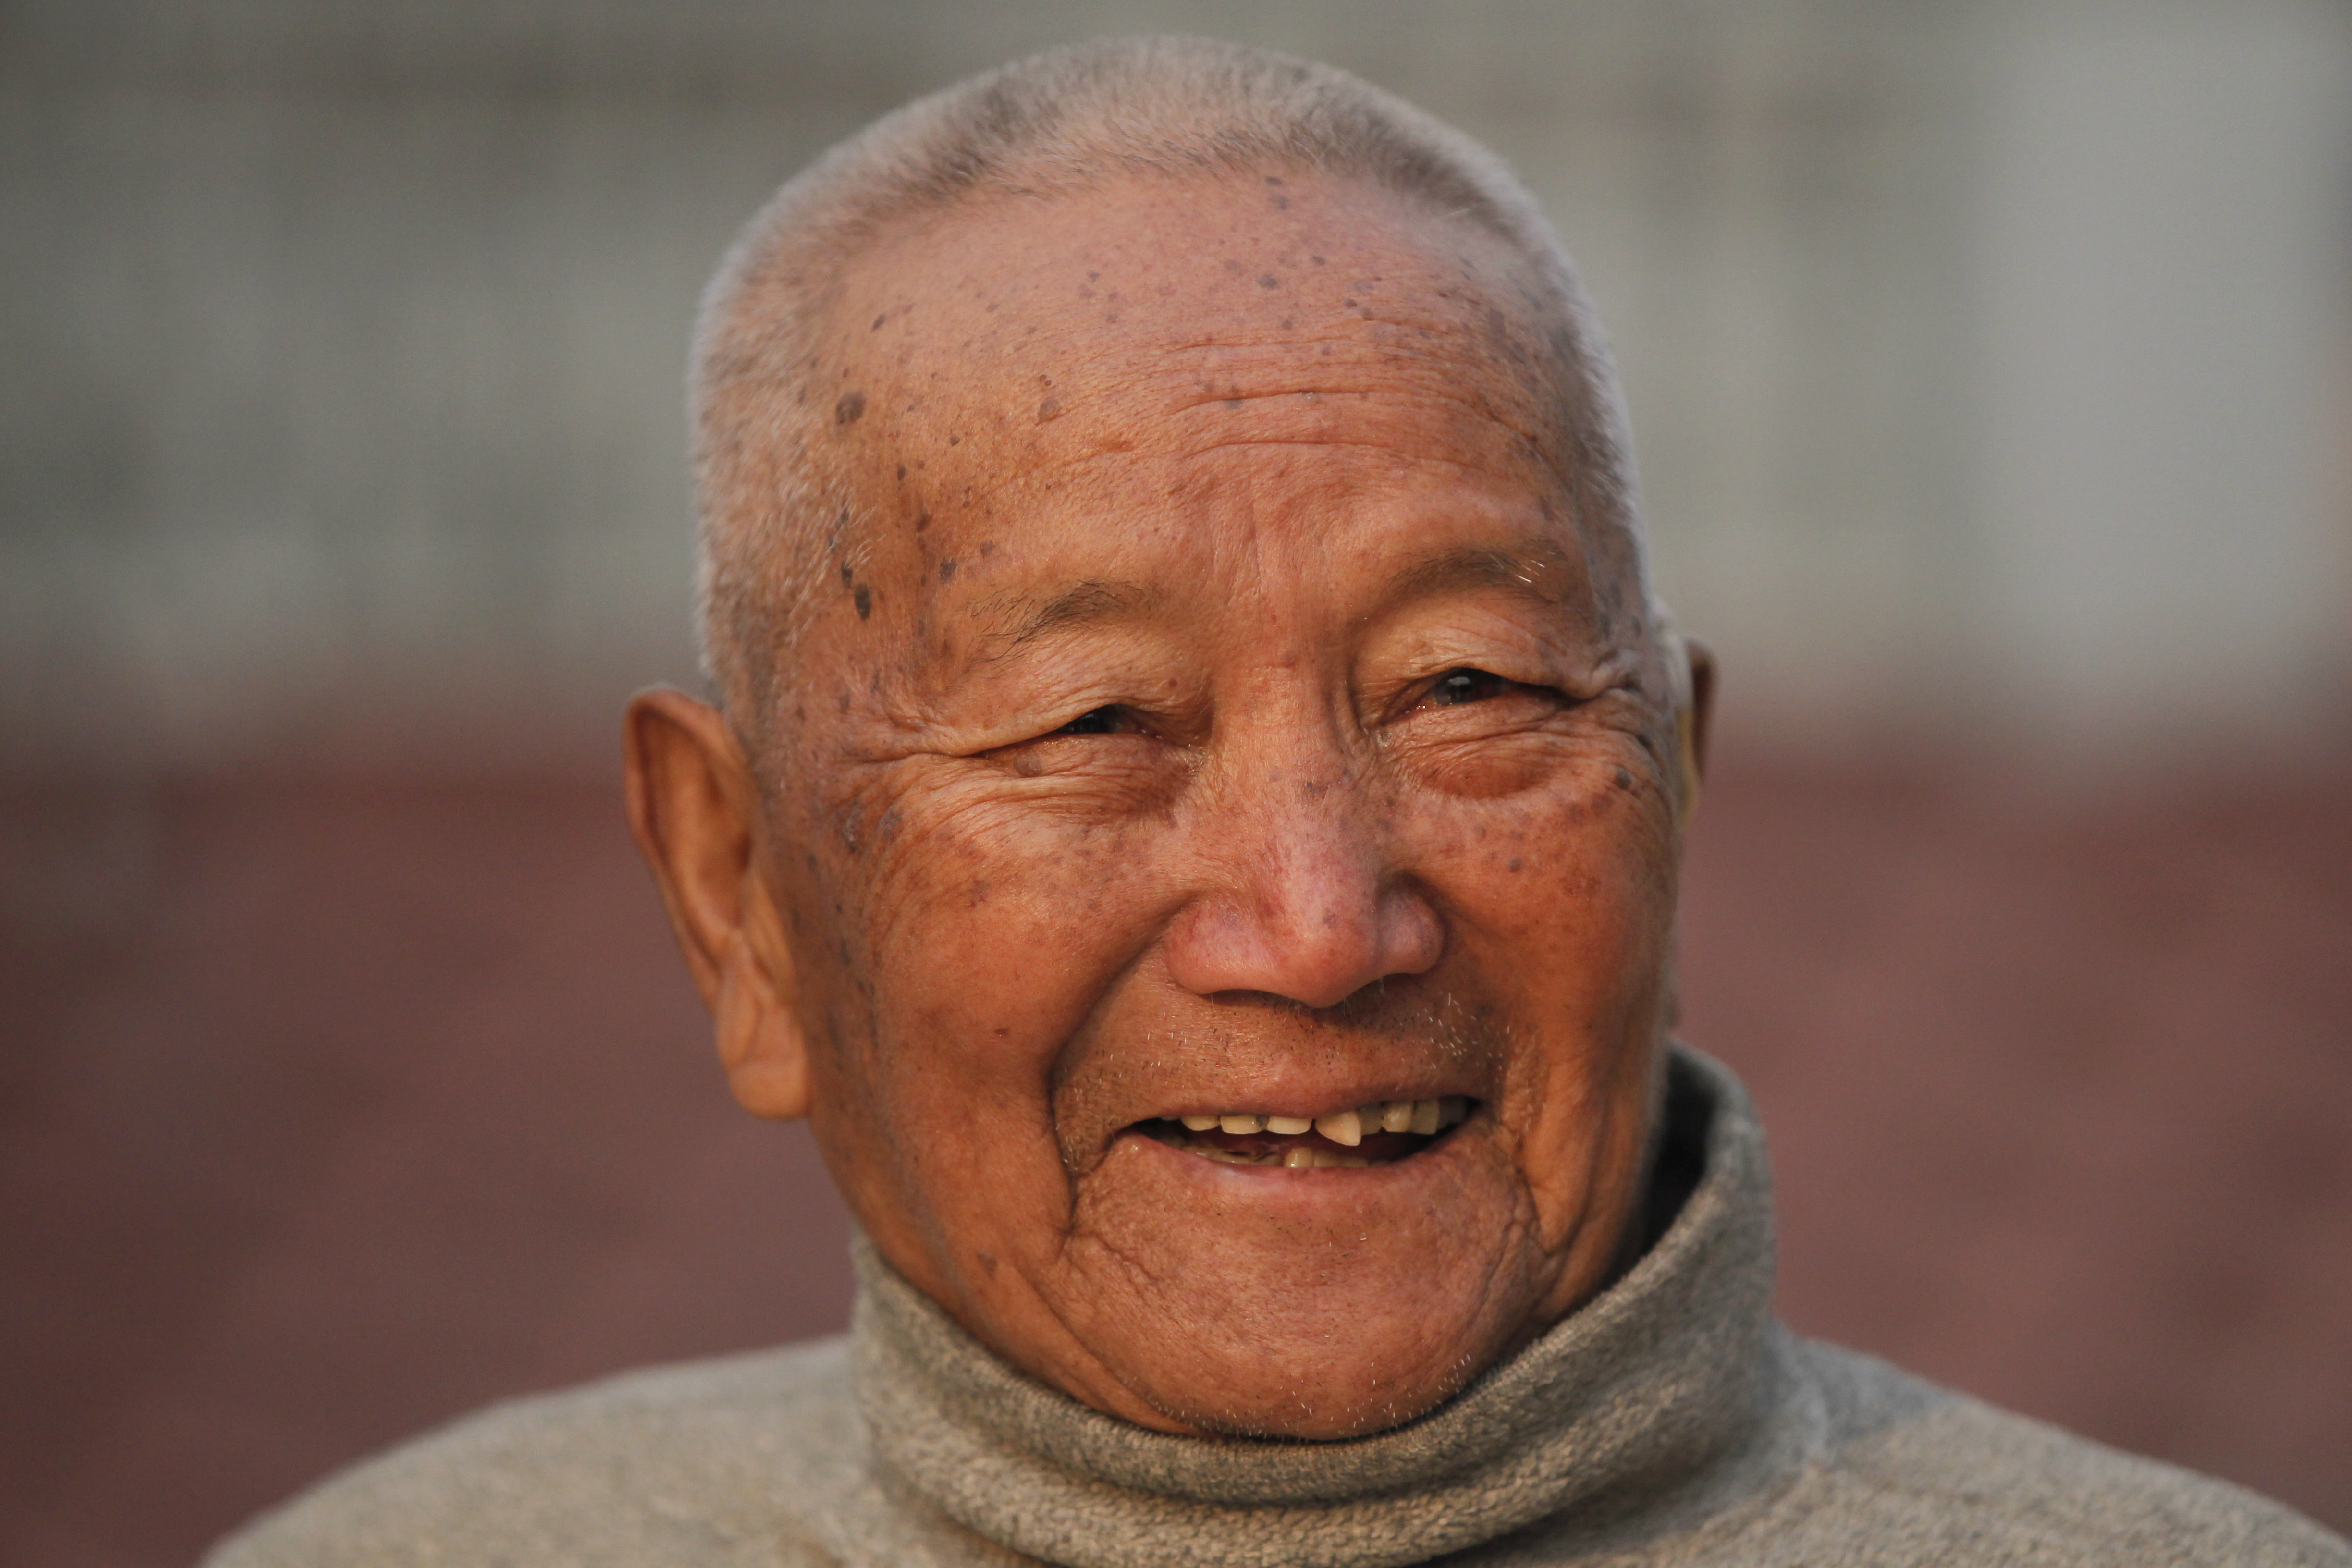 Nepalese mountain climber Min Bahadur Sherchan, smiles as he finishes his morning Yoga workout at his residence in Kathmandu, Nepal, Wednesday, April 12, 2017. The 85-year-old climber who was once the oldest person to scale the world’s highest mountain is heading back to Mount Everest in hopes of scaling the peak and regaining the title. Sherchan is aiming to scale the peak next month when there is window of favorable weather on the summit. (AP Photo/Niranjan Shrestha)